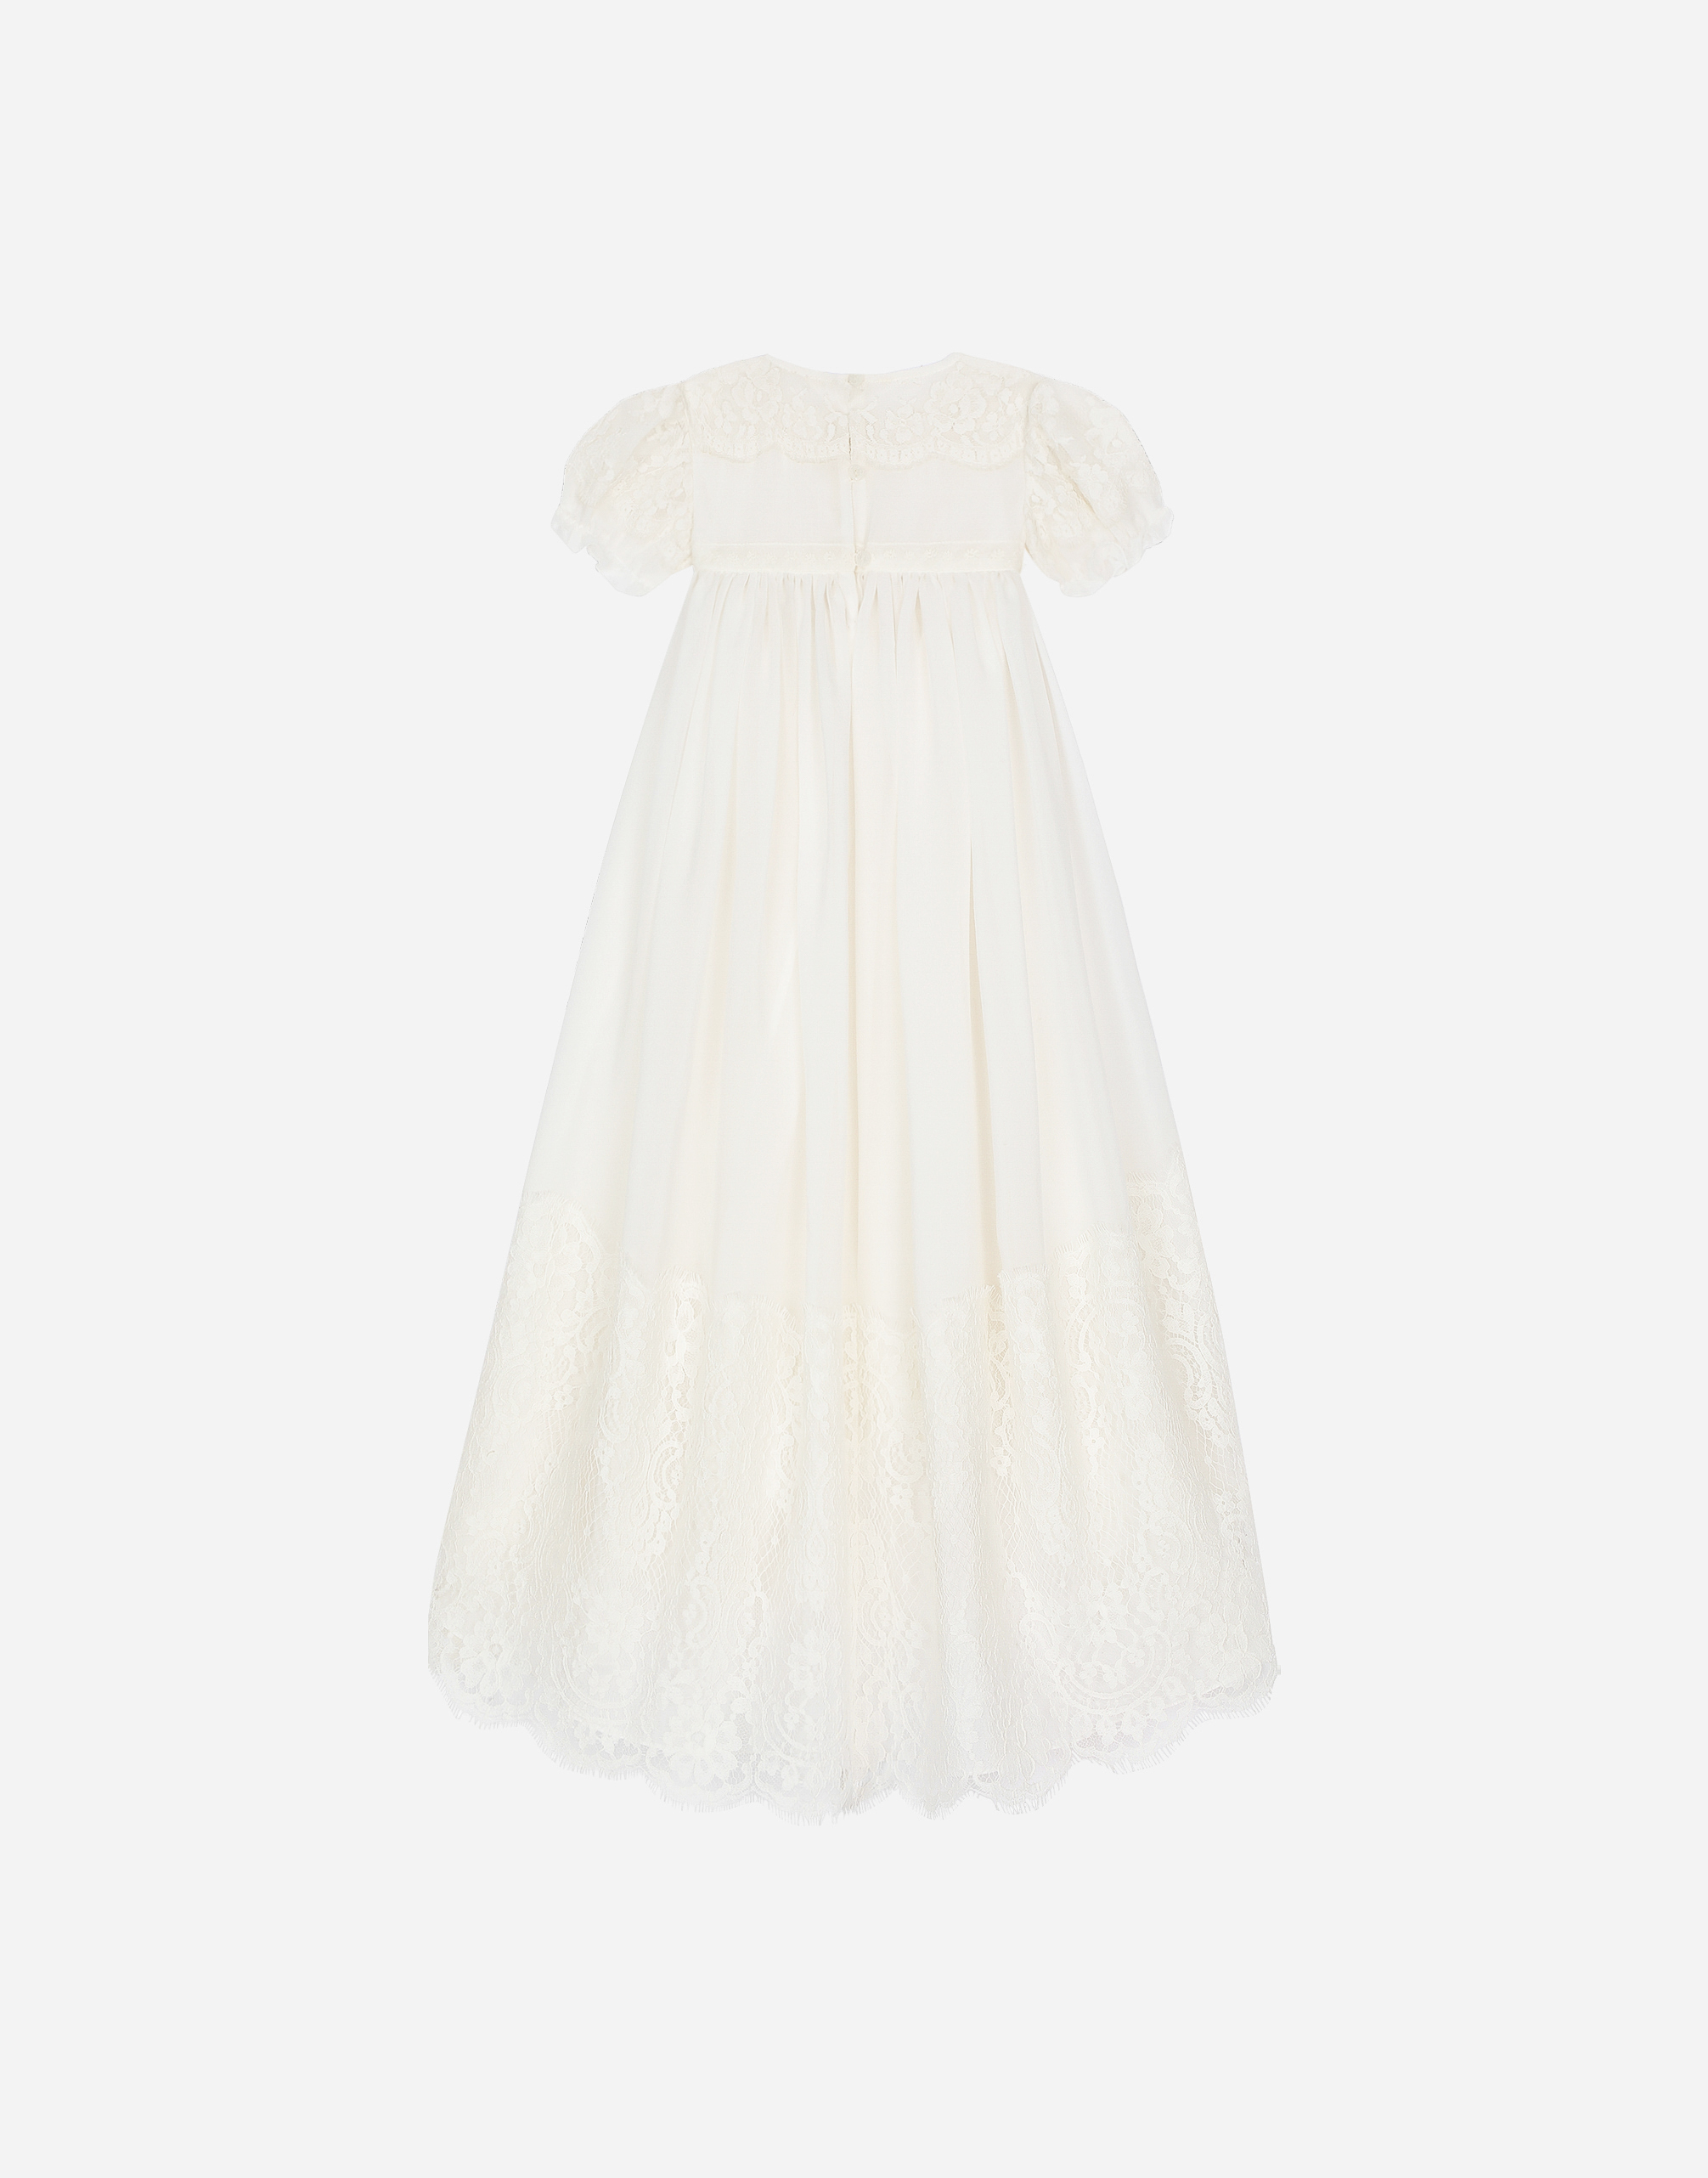 Elegant Baby Shower Dress For Girls Delicate Infant Christening Outfit With  Elegant Style And Soft Touch Fabric From Hxhgood, $22 | DHgate.Com